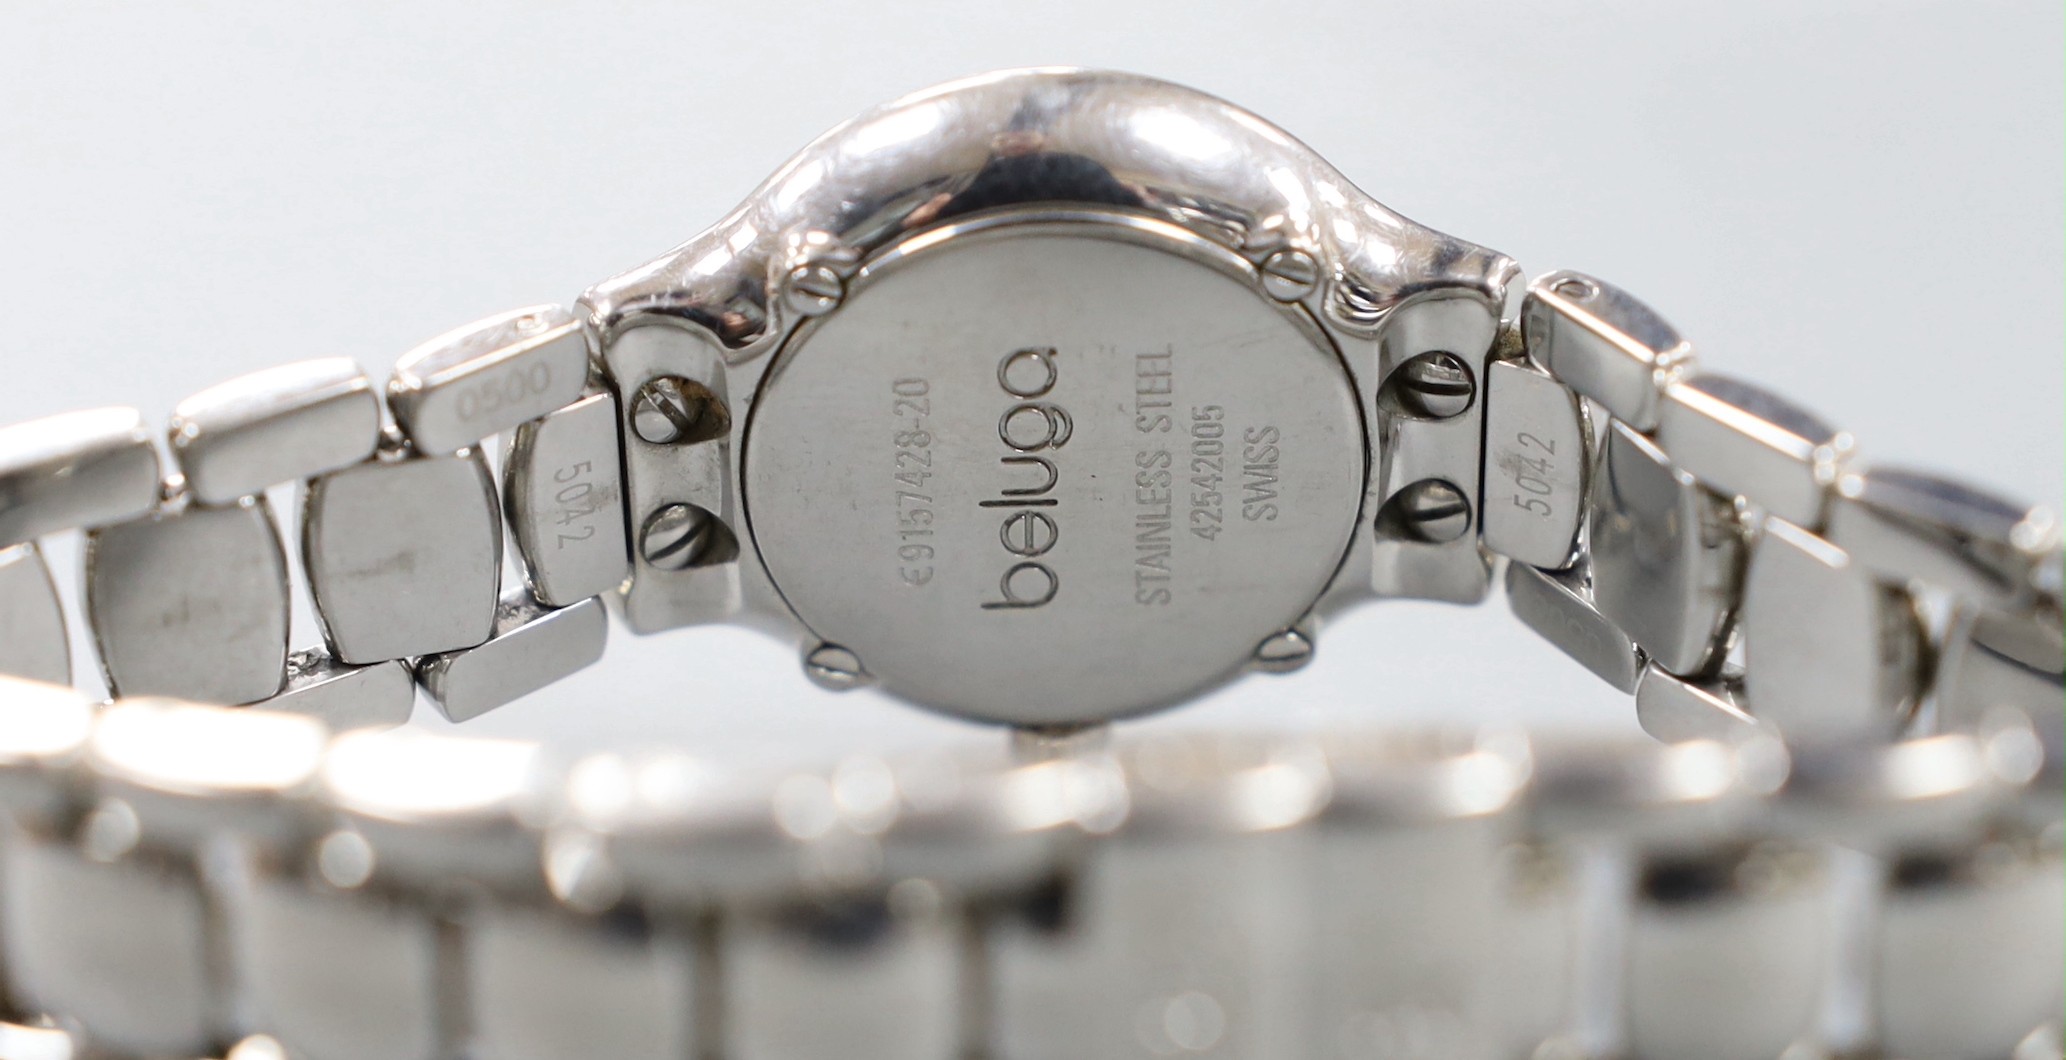 A lady's modern stainless steel Ebel quartz wrist watch and bracelet with diamond set dial and bezel, with box and papers.